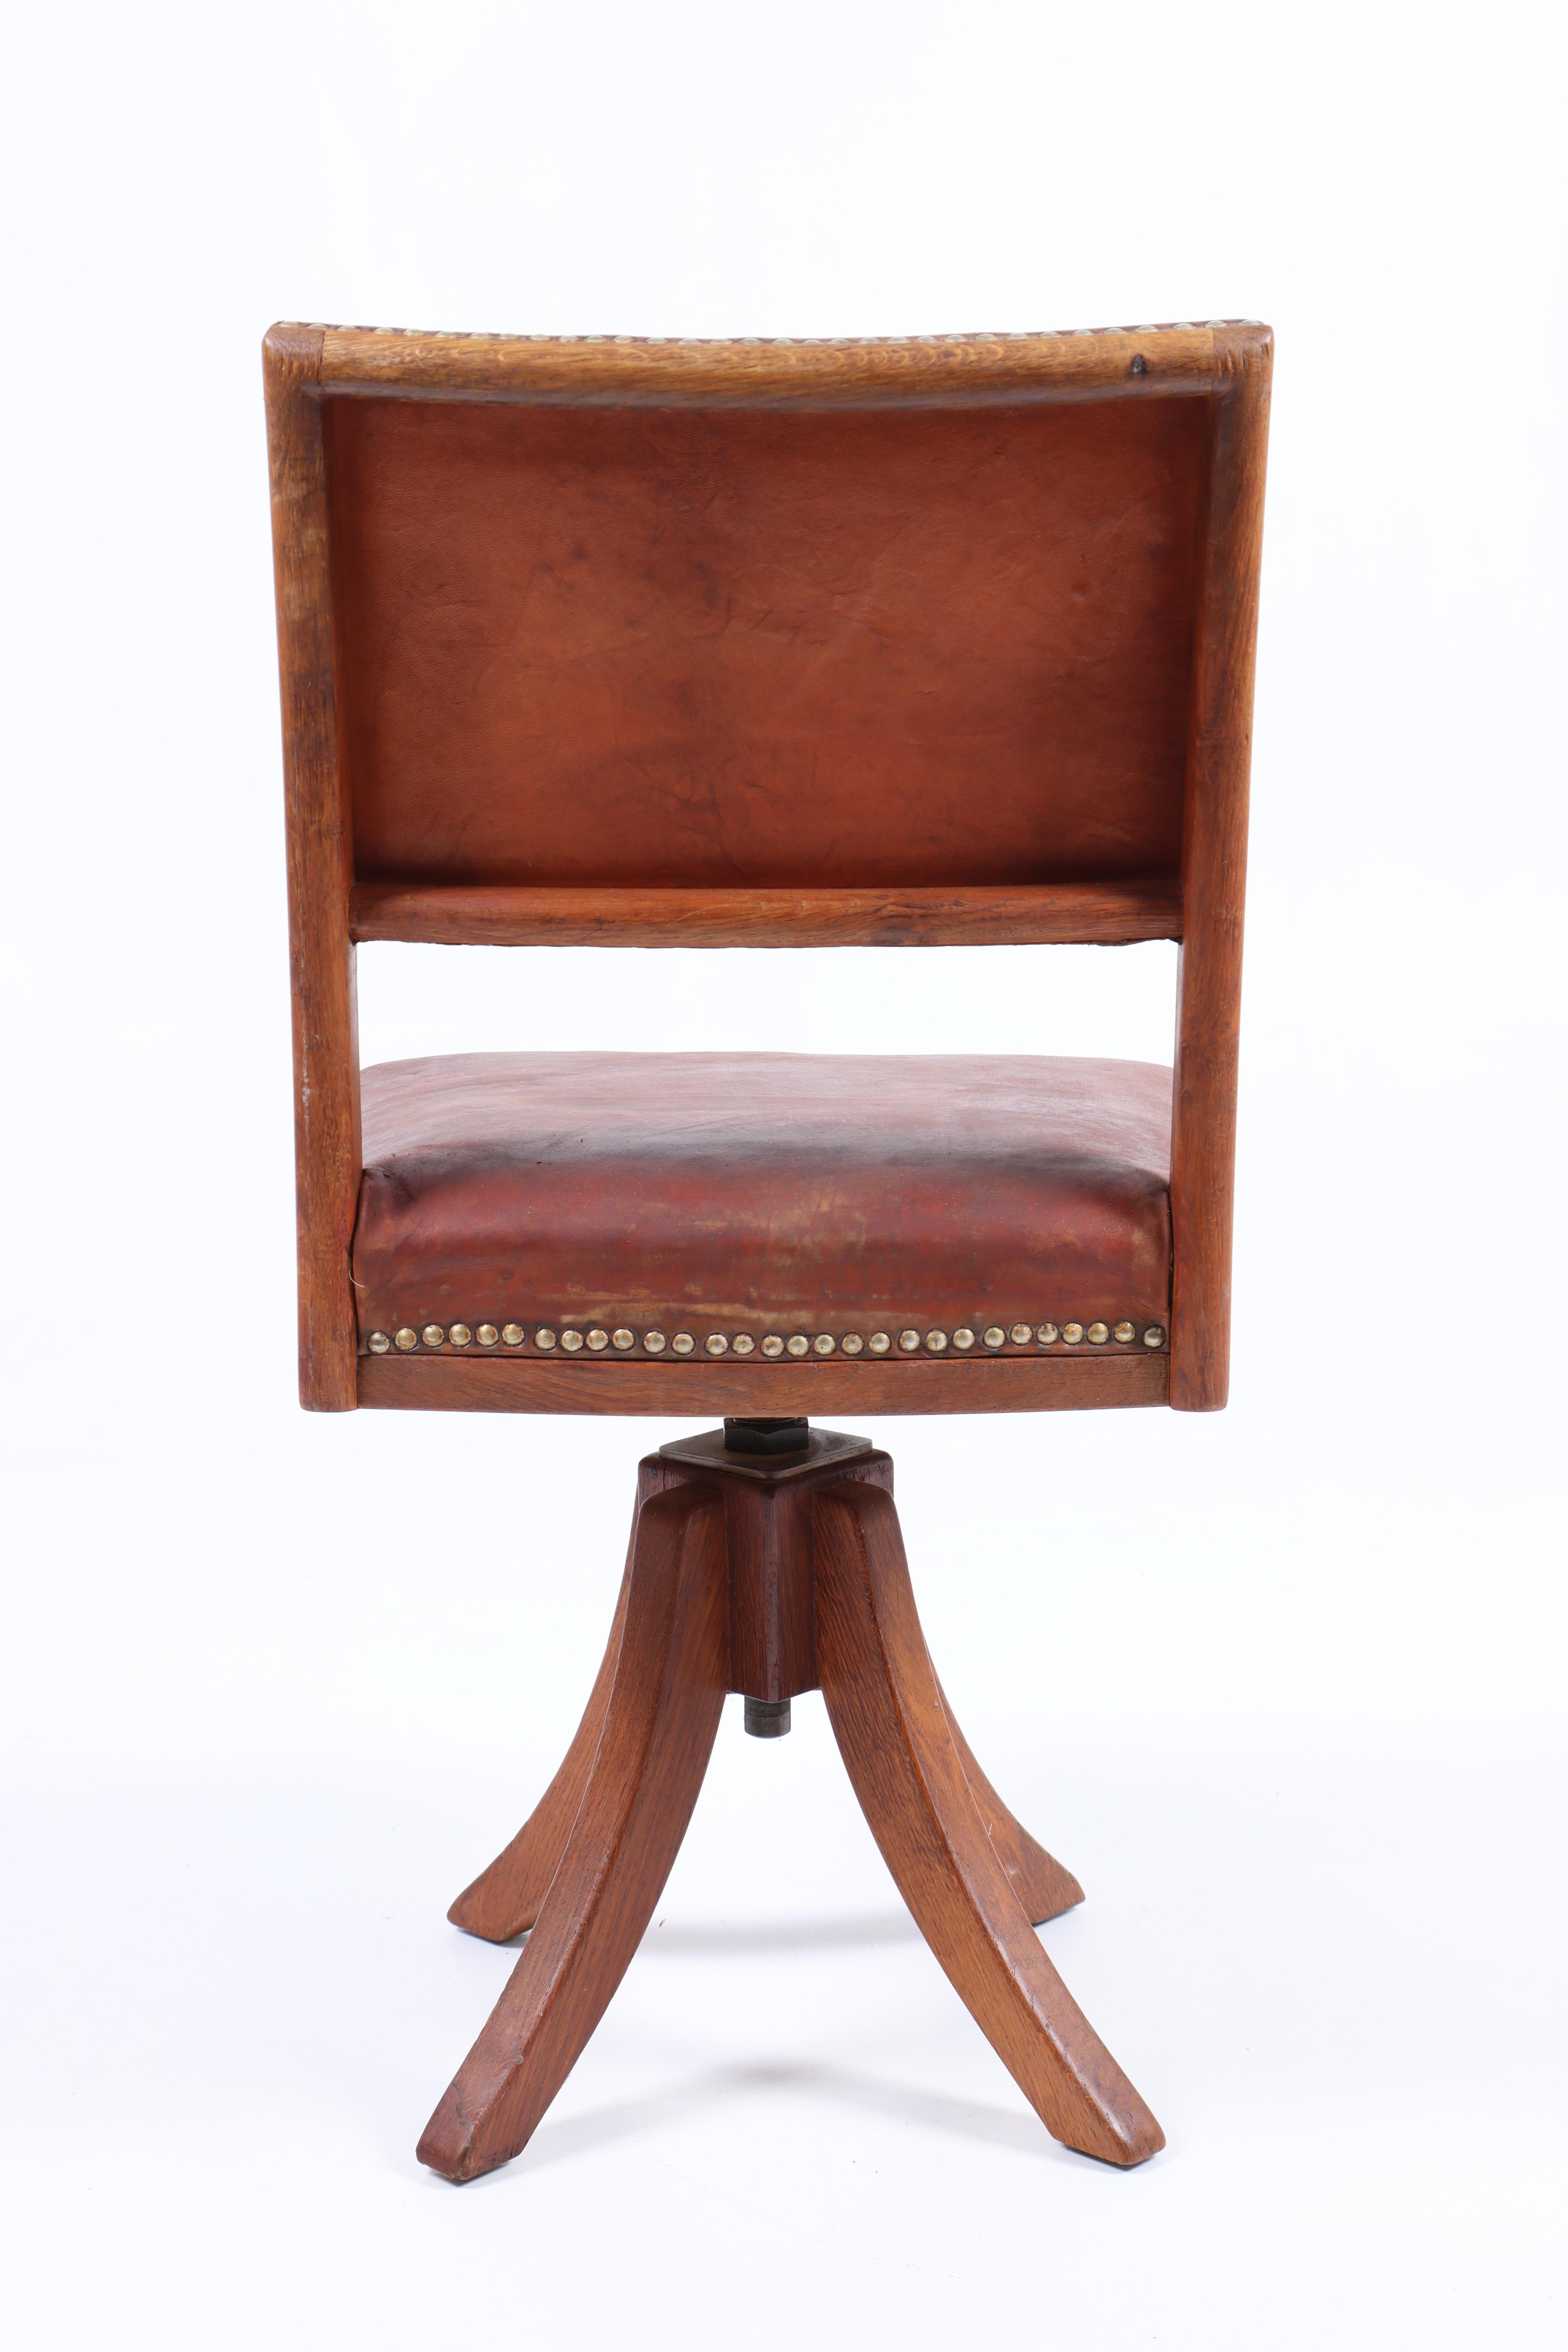 Mid-20th Century Desk Chair in Patinated Leather and Oak by Danish Cabinetmaker Frits Henningsen For Sale